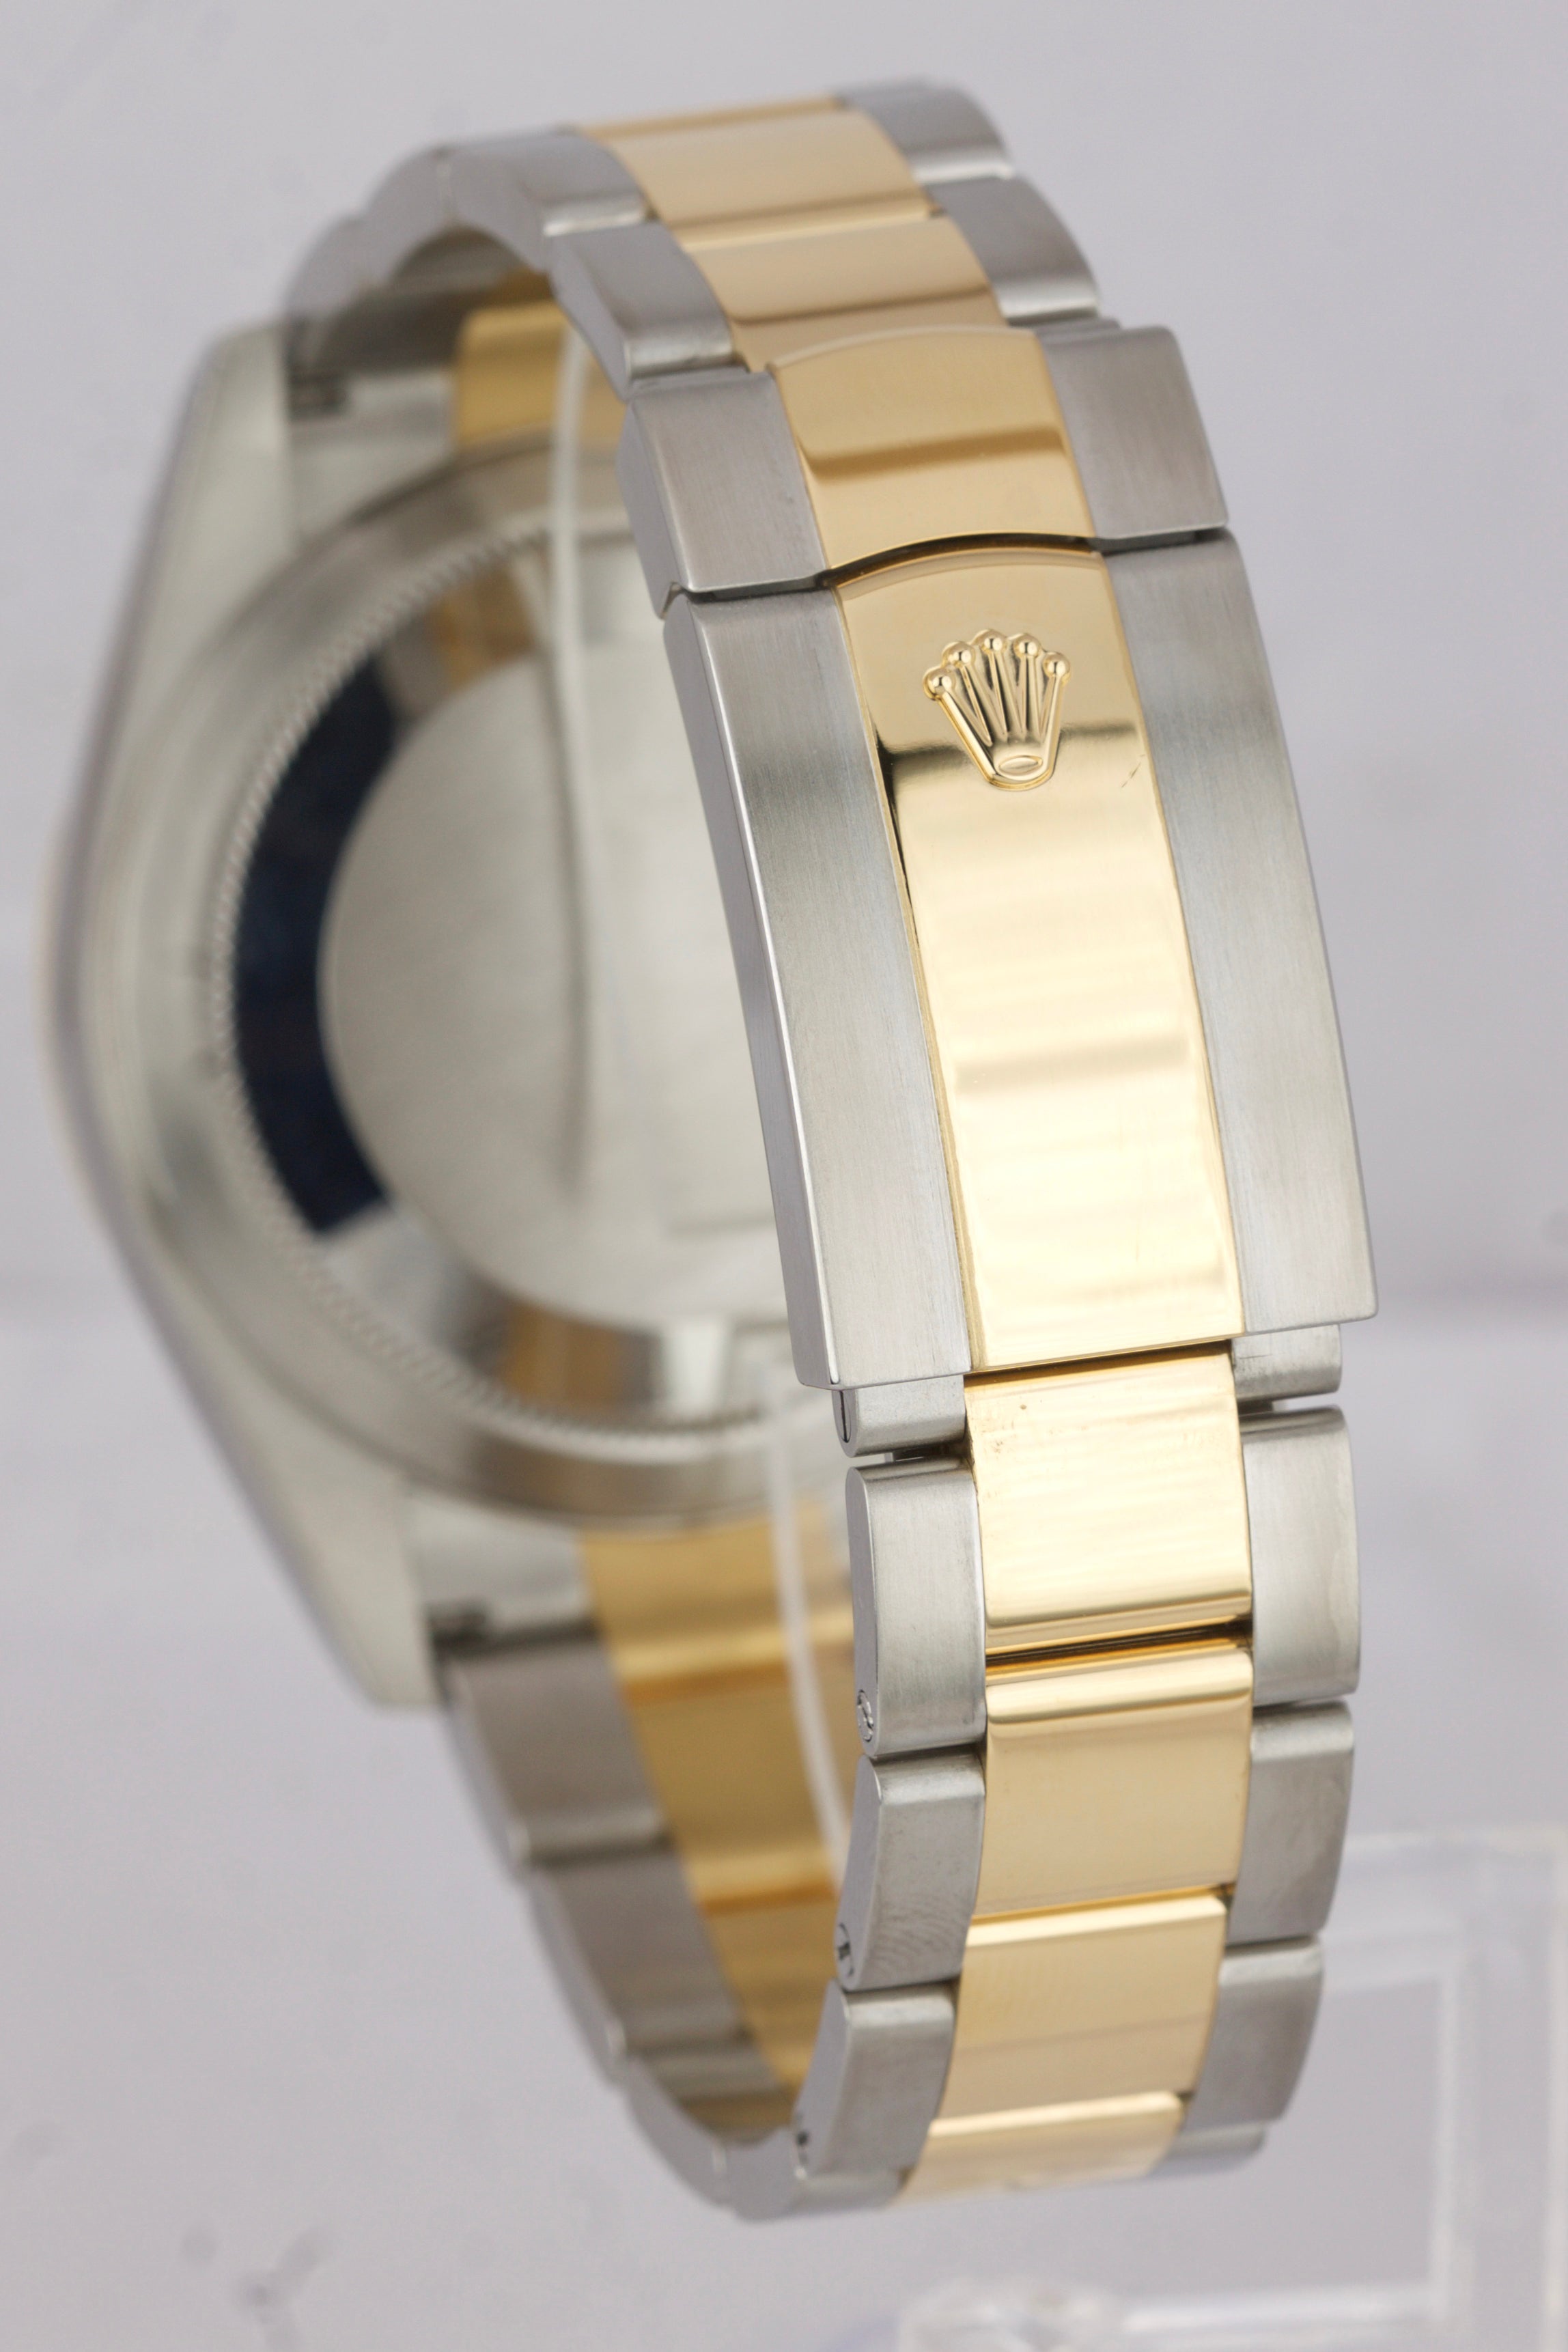 2019 Rolex Sky-Dweller 326933 Champagne 18K Two Tone Gold Stainless 42mm Watch